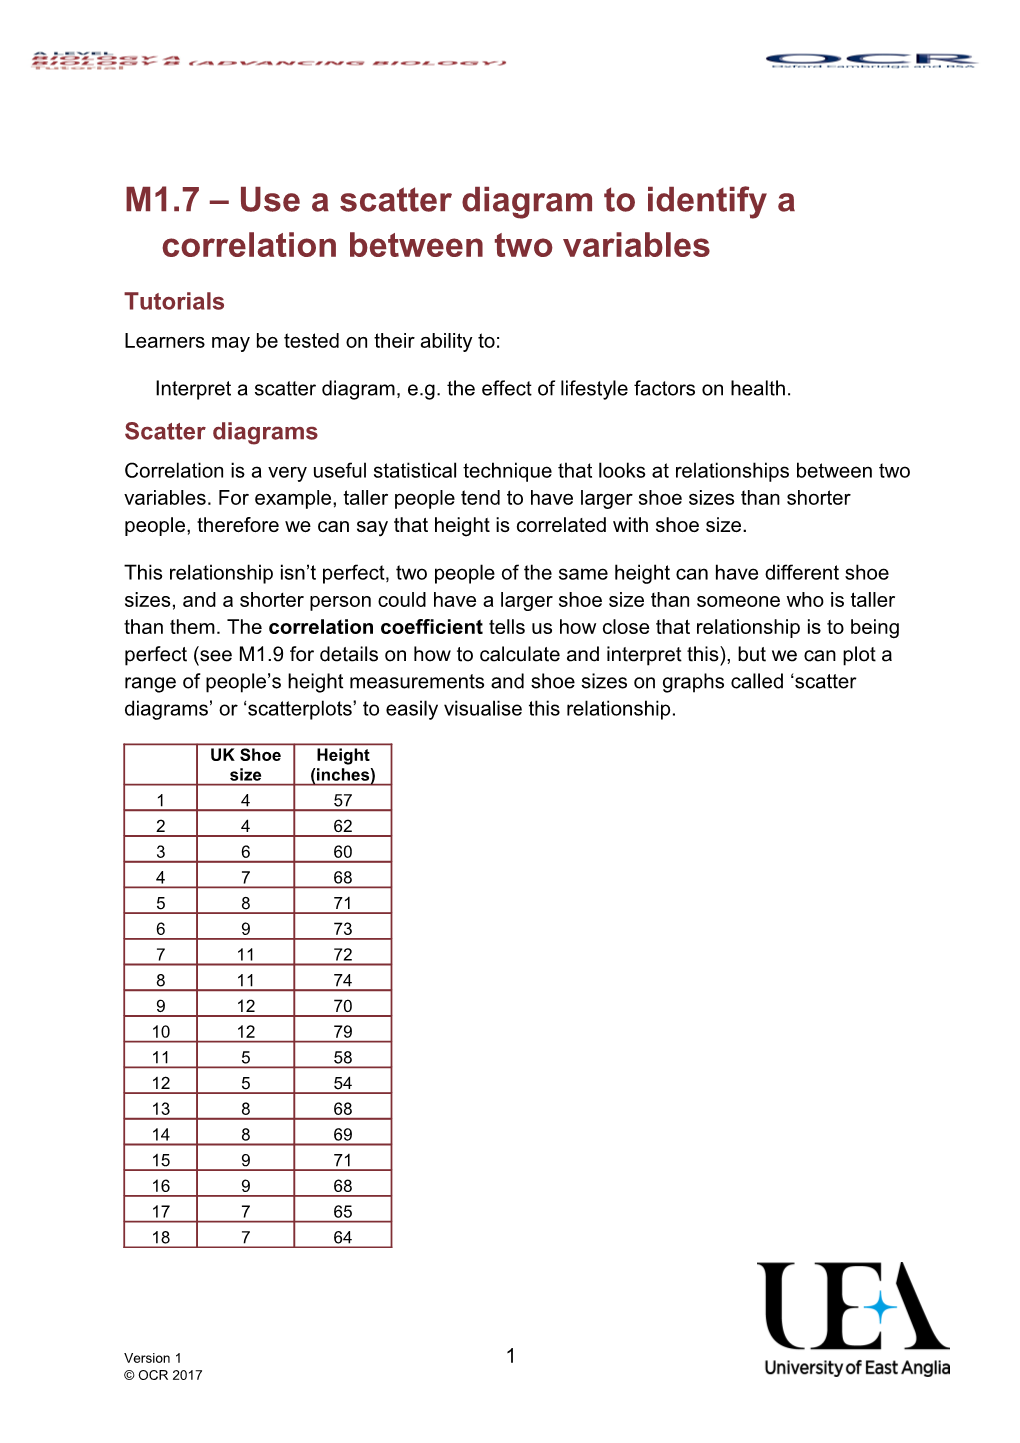 Maths in Biology M1.7 Tutorial Use a Scatter Diagram to Identify a Correlation Between